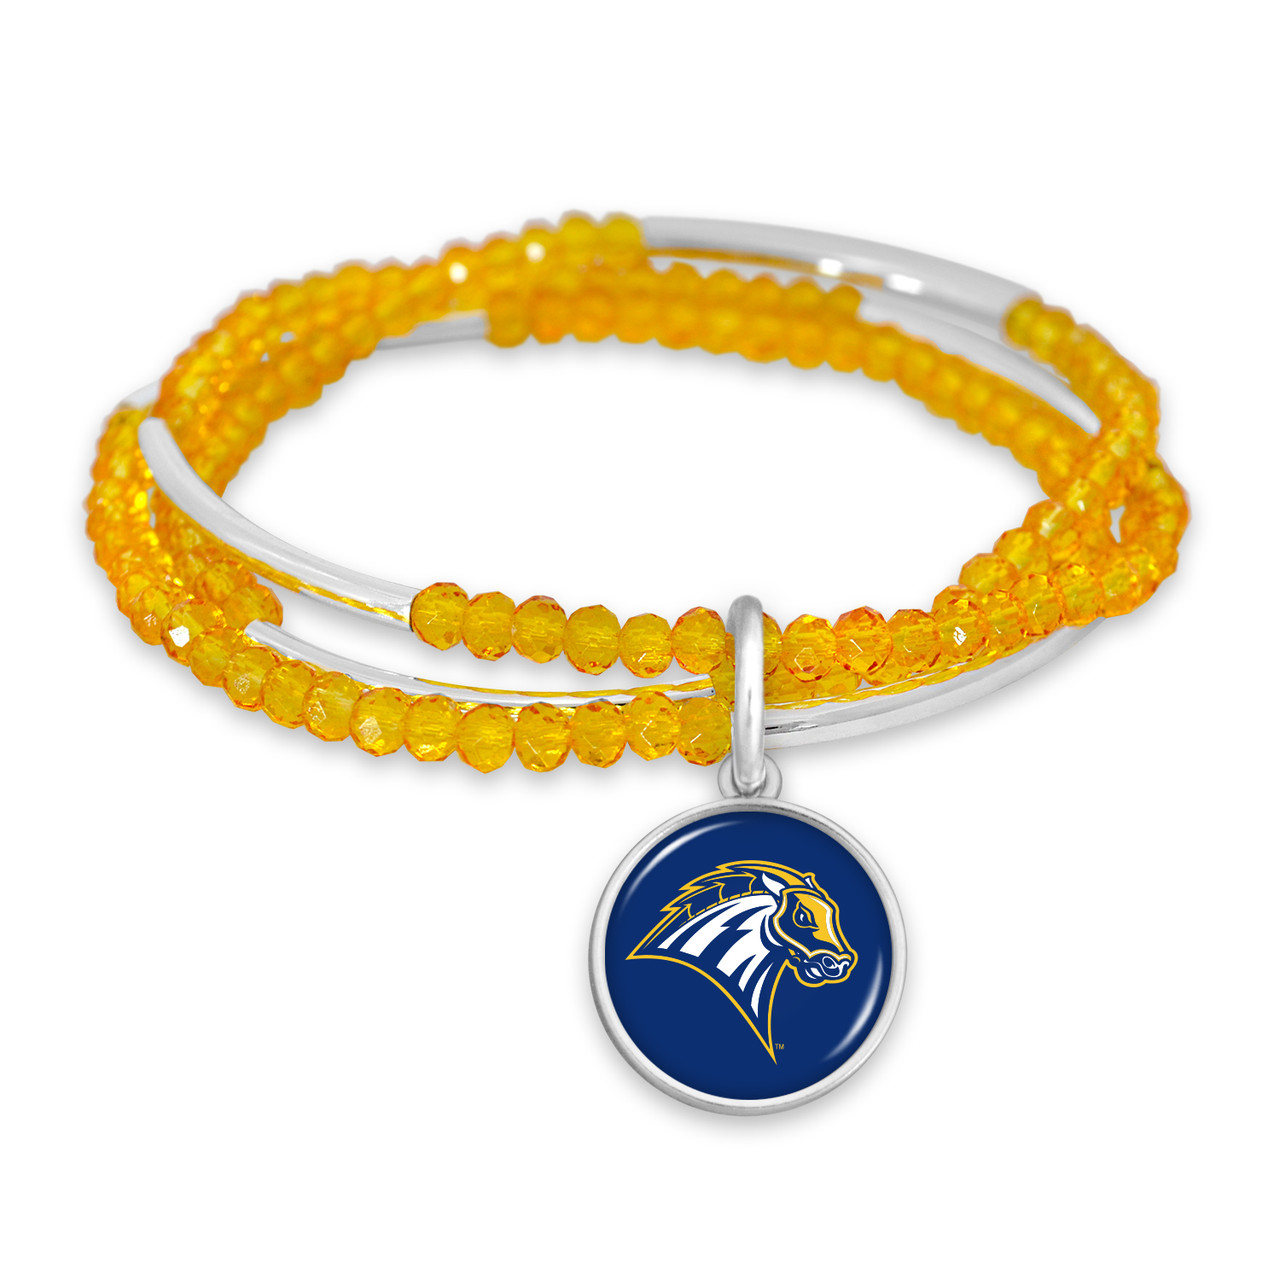 New Haven Chargers Bracelet- Chloe Secondary